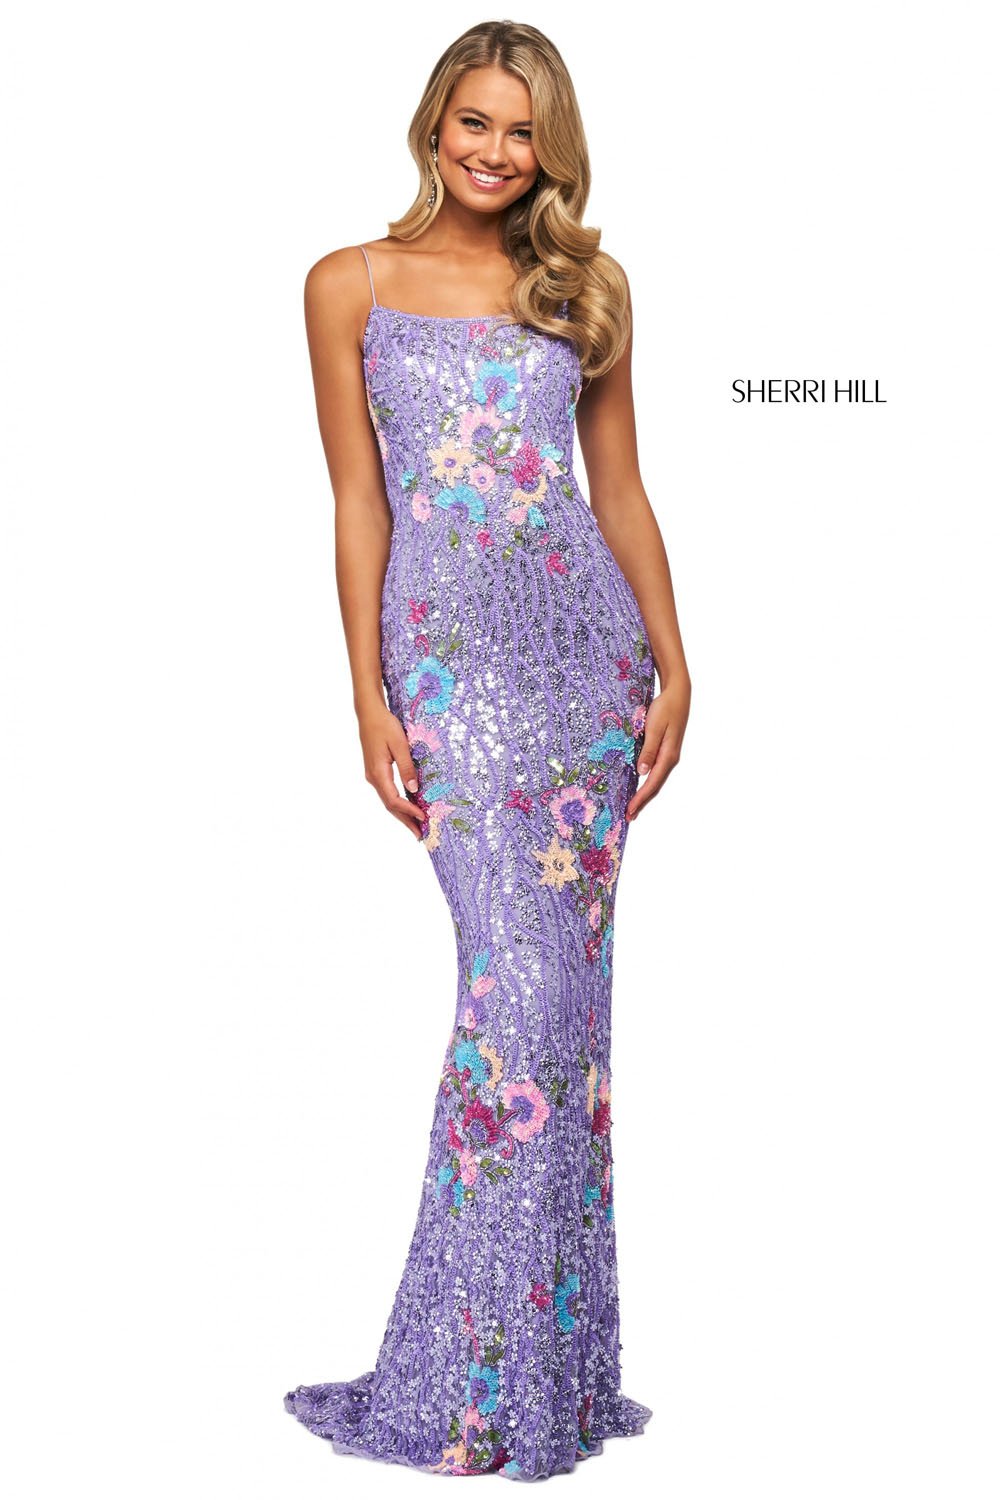 Sherri Hill 53816 dress images in these colors: Lilac Multi.